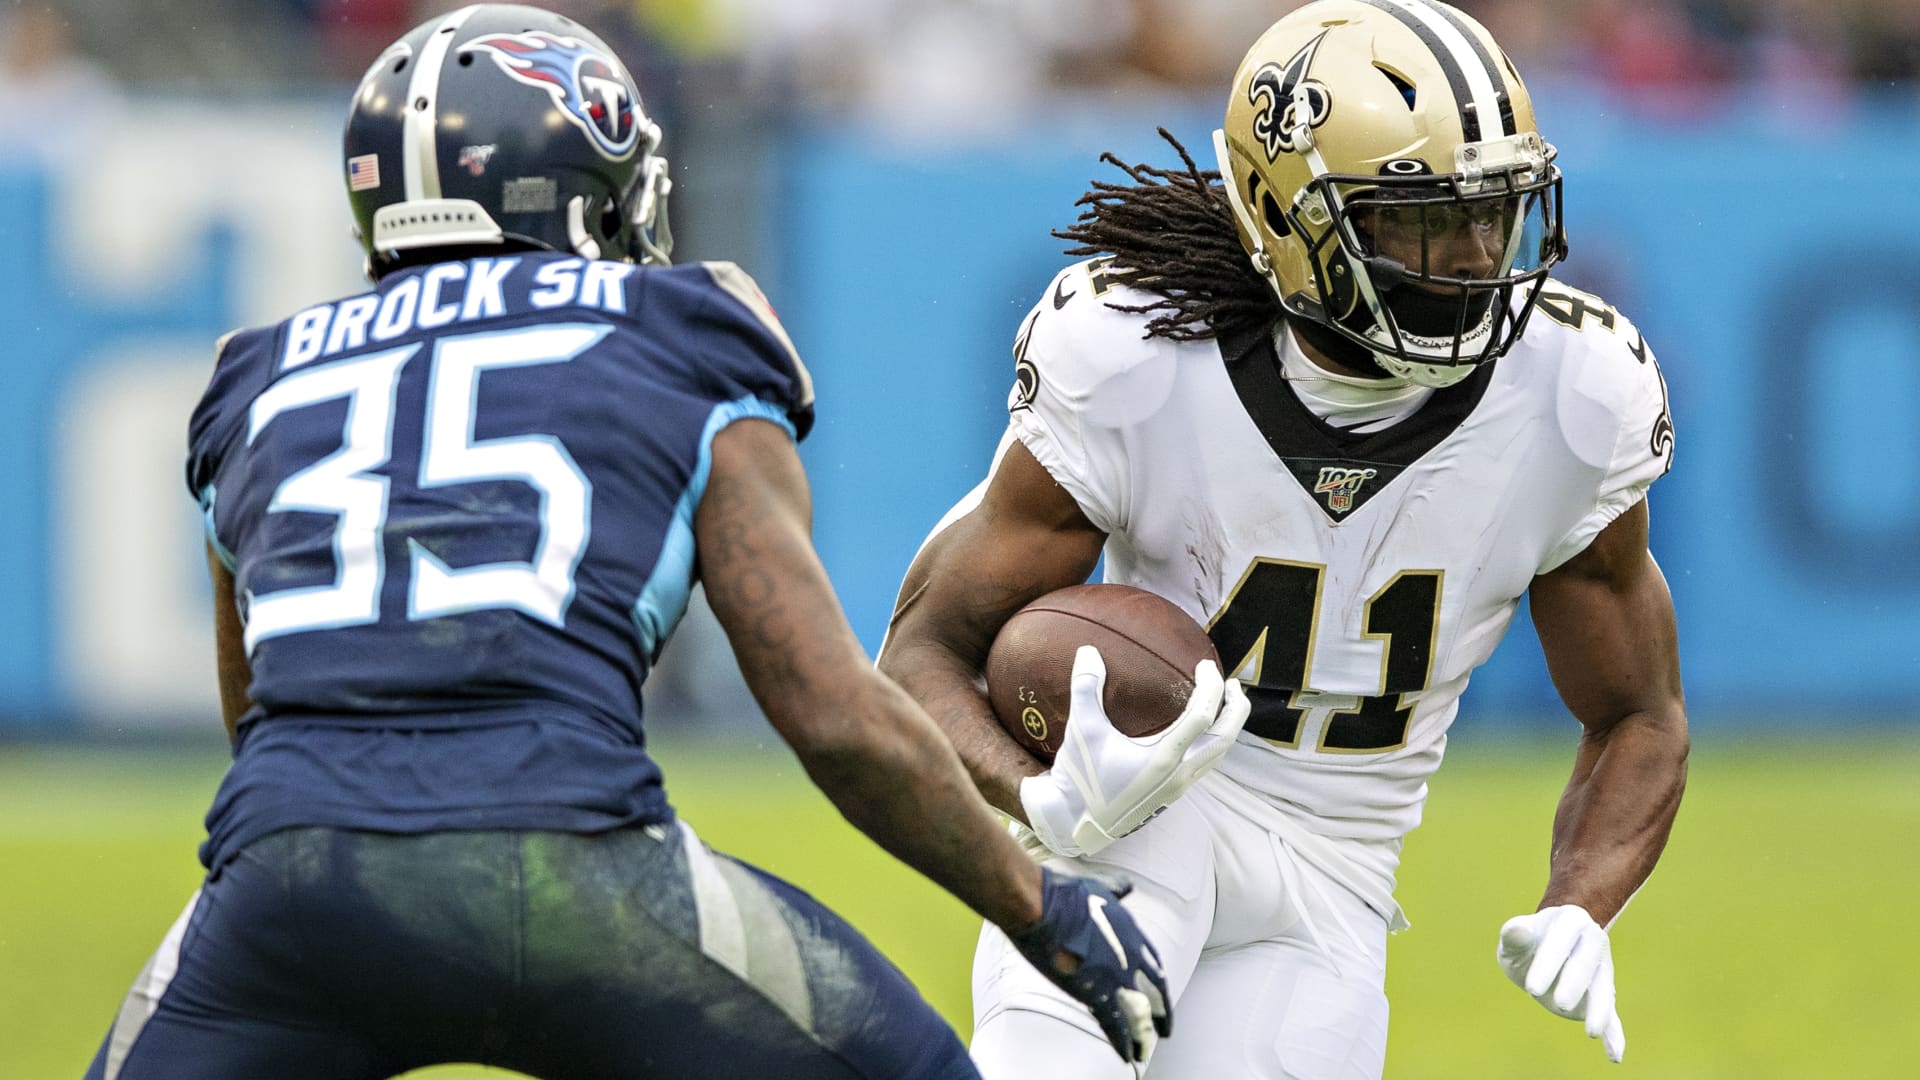 Alvin Kamara #41 of the New Orleans Saints runs the ball during a game against the Tennessee Titans at Nissan Stadium on December 22, 2019 in Nashville, Tennessee.